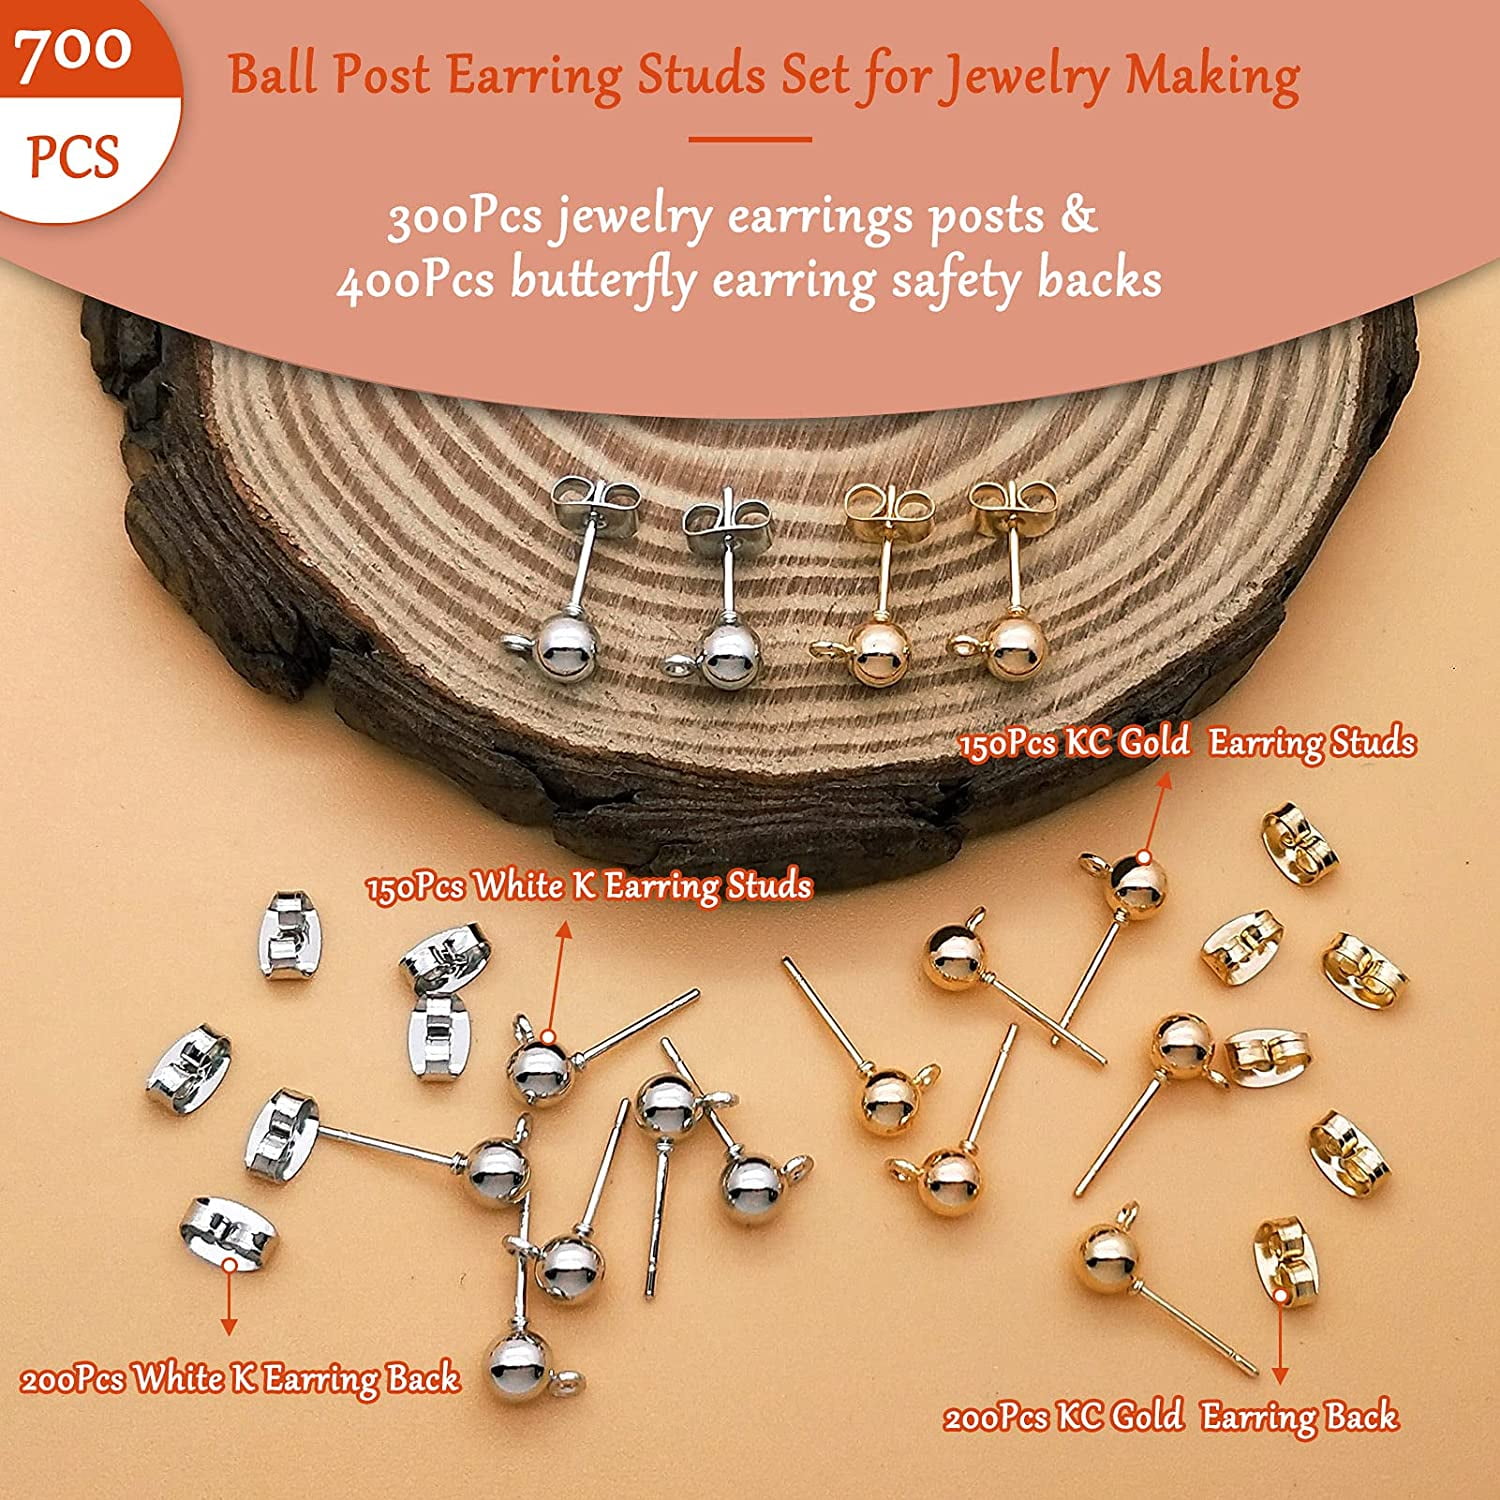 150Pcs Ball Post Earring Studs for Jewelry Making,Earring Studs Ball Ear  Pin Ball Post Earrings with Loop with 200Pcs Butterfly Earring Back